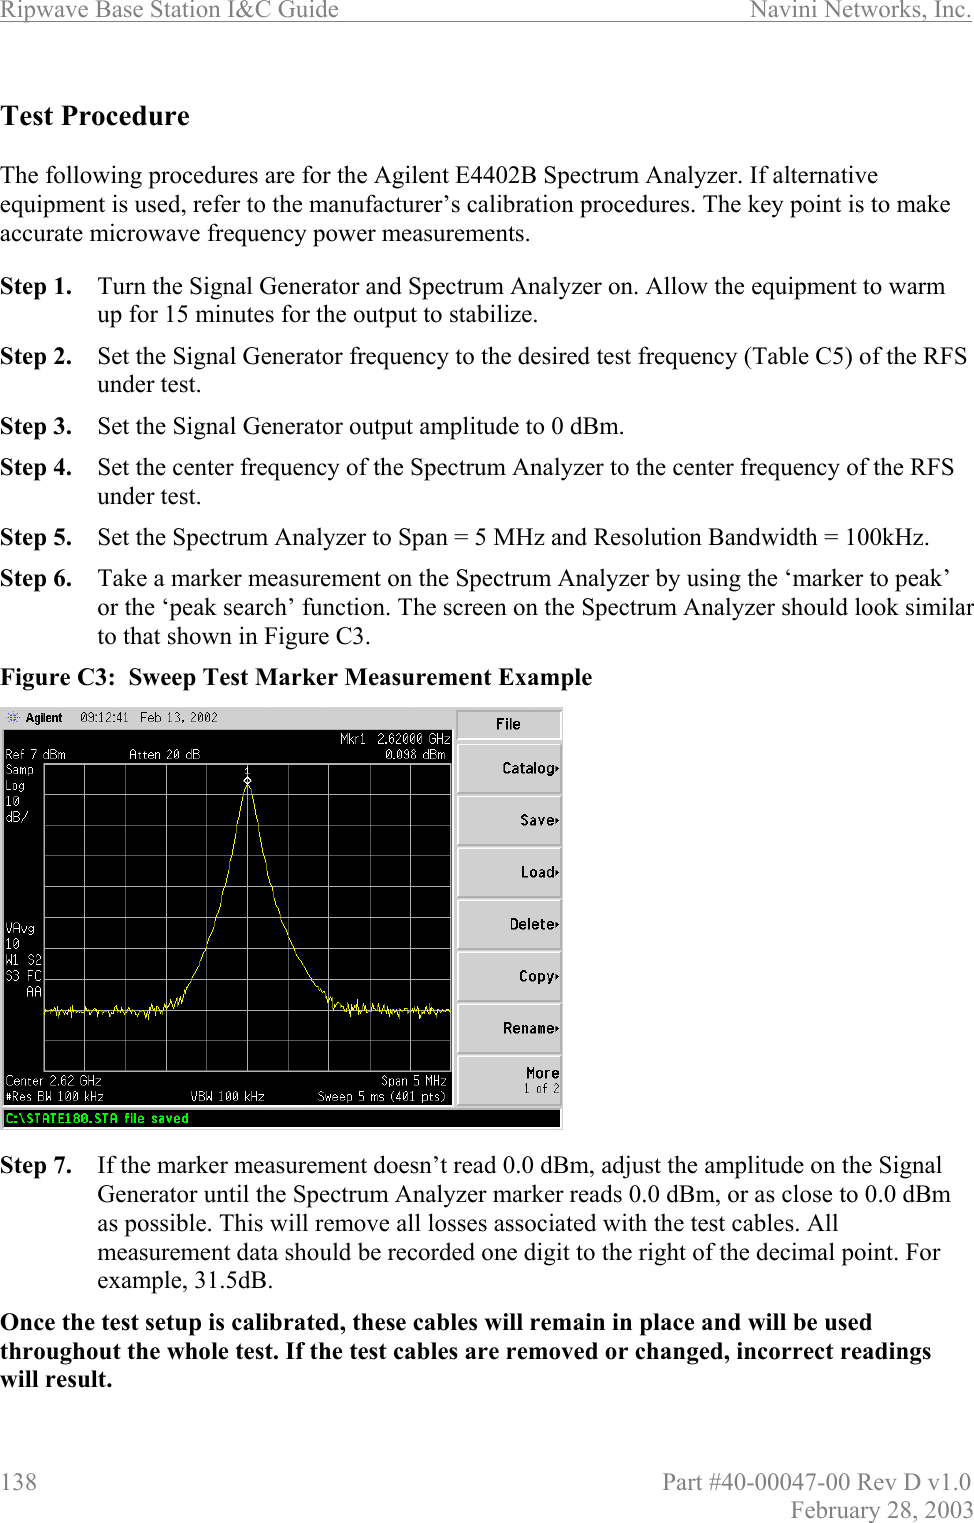 Ripwave Base Station I&amp;C Guide                      Navini Networks, Inc. 138                          Part #40-00047-00 Rev D v1.0 February 28, 2003  Test Procedure  The following procedures are for the Agilent E4402B Spectrum Analyzer. If alternative equipment is used, refer to the manufacturer’s calibration procedures. The key point is to make accurate microwave frequency power measurements.  Step 1.  Turn the Signal Generator and Spectrum Analyzer on. Allow the equipment to warm up for 15 minutes for the output to stabilize. Step 2.  Set the Signal Generator frequency to the desired test frequency (Table C5) of the RFS under test.  Step 3.  Set the Signal Generator output amplitude to 0 dBm. Step 4.  Set the center frequency of the Spectrum Analyzer to the center frequency of the RFS under test. Step 5.  Set the Spectrum Analyzer to Span = 5 MHz and Resolution Bandwidth = 100kHz. Step 6.  Take a marker measurement on the Spectrum Analyzer by using the ‘marker to peak’ or the ‘peak search’ function. The screen on the Spectrum Analyzer should look similar to that shown in Figure C3. Figure C3:  Sweep Test Marker Measurement Example                 Step 7.  If the marker measurement doesn’t read 0.0 dBm, adjust the amplitude on the Signal Generator until the Spectrum Analyzer marker reads 0.0 dBm, or as close to 0.0 dBm as possible. This will remove all losses associated with the test cables. All measurement data should be recorded one digit to the right of the decimal point. For example, 31.5dB.   Once the test setup is calibrated, these cables will remain in place and will be used throughout the whole test. If the test cables are removed or changed, incorrect readings will result. 